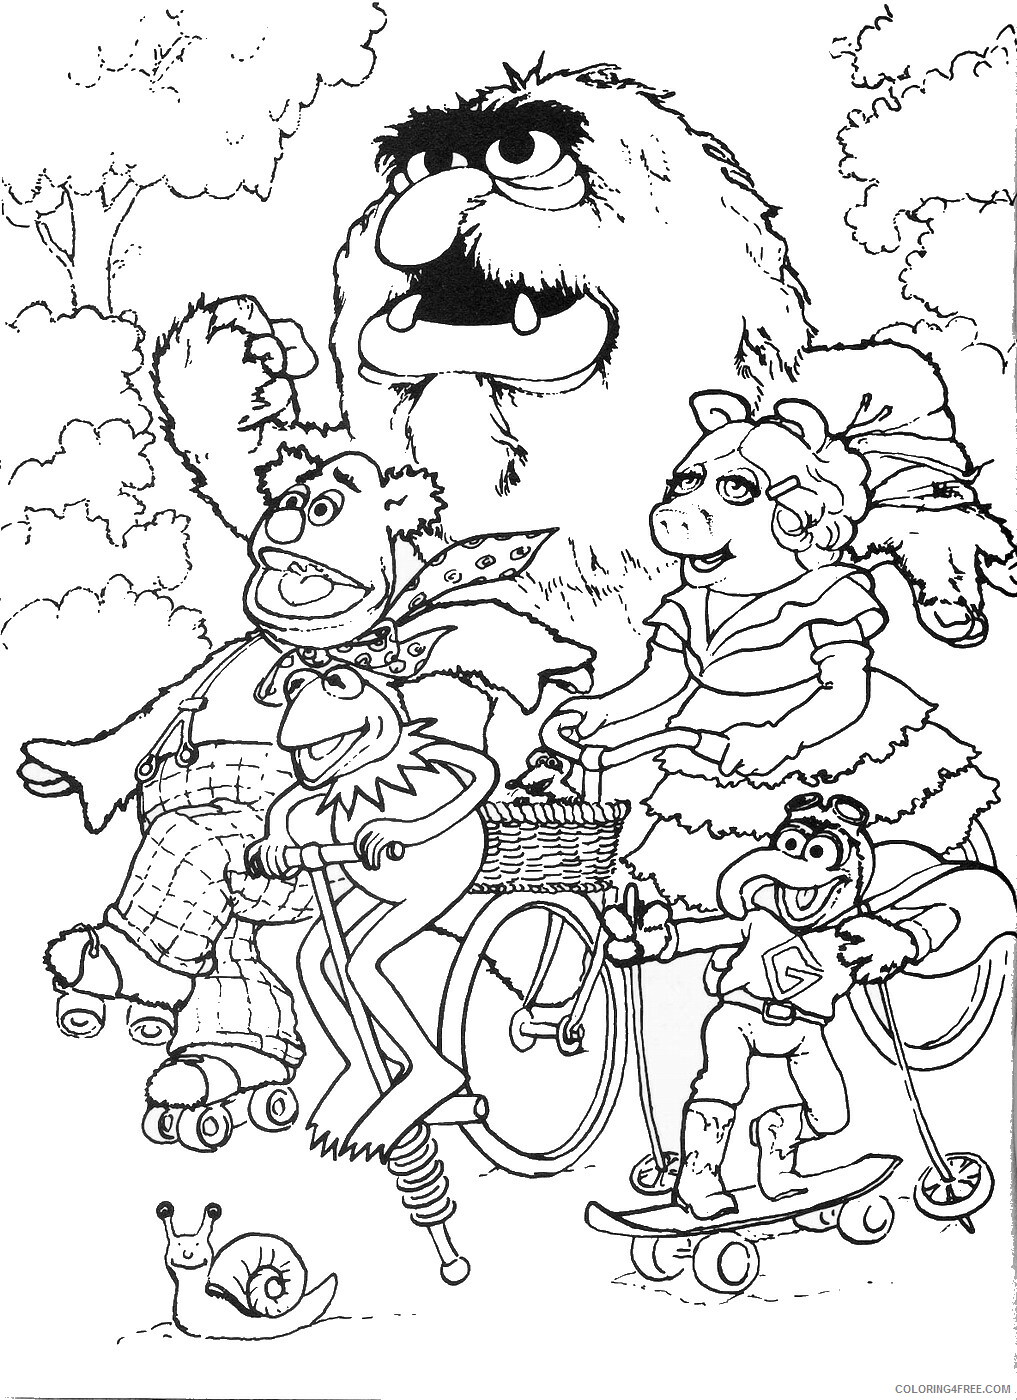 The Muppet Show Coloring Pages TV Film muppets_cl_18 Printable 2020 09377 Coloring4free